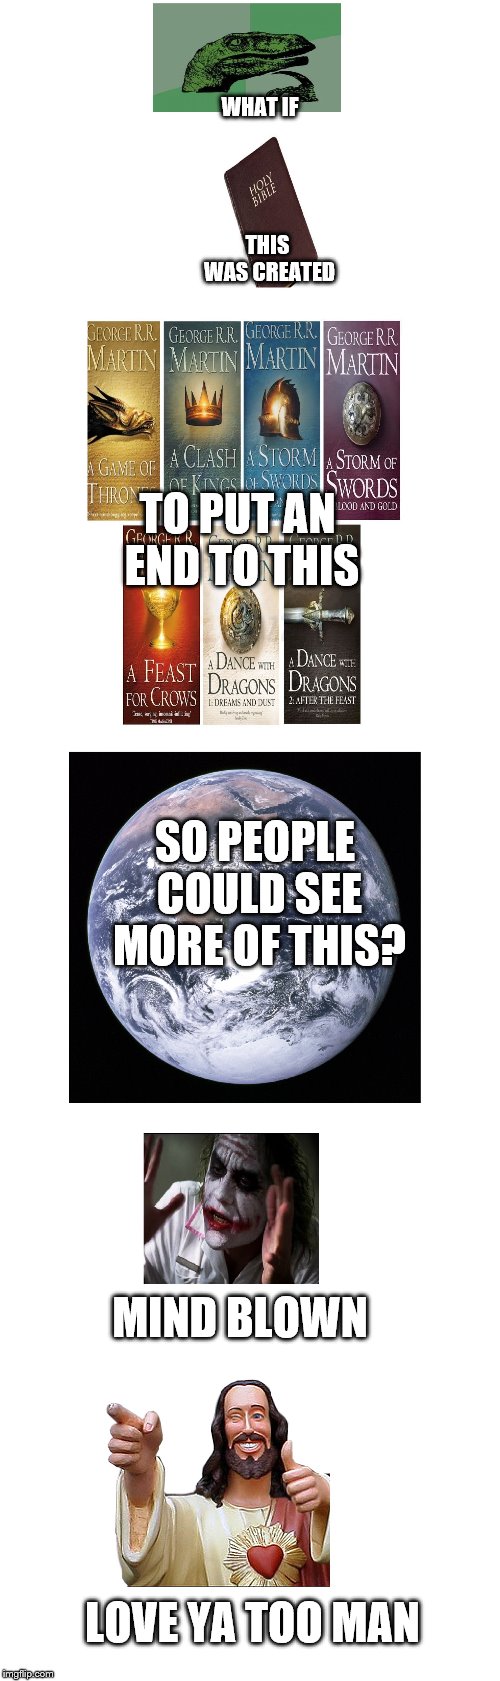 I wonder... | WHAT IF; THIS WAS CREATED; TO PUT AN END TO THIS; SO PEOPLE COULD SEE MORE OF THIS? MIND BLOWN; LOVE YA TOO MAN | image tagged in jesus christ,game of thrones,end of the world,love,philosophy | made w/ Imgflip meme maker